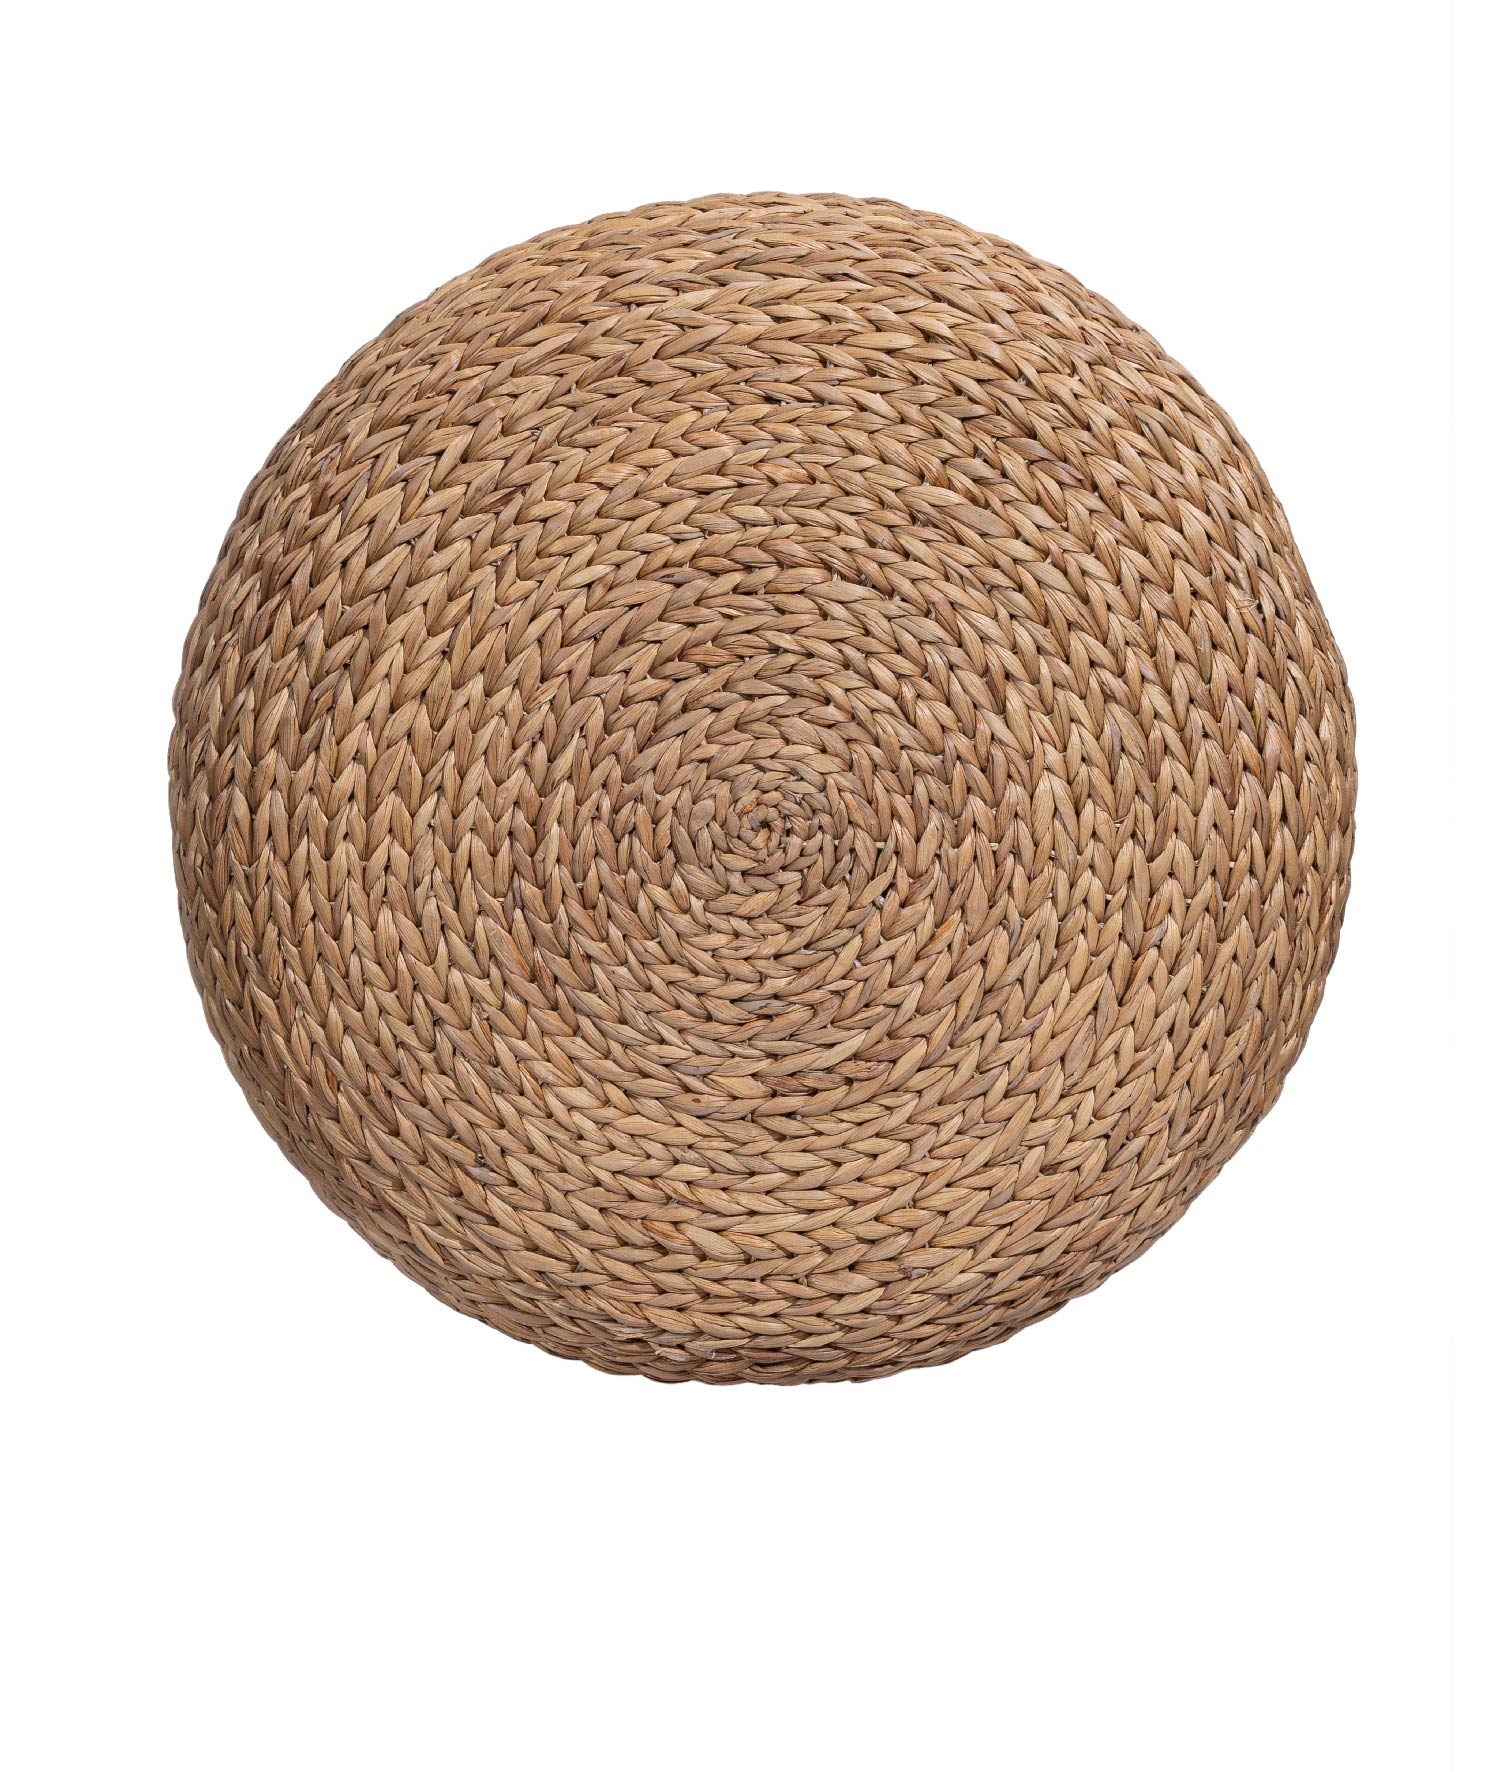 Meander Water Hyacinth Jute Straw Hand Knitted Pouf Cushion 50x15cm